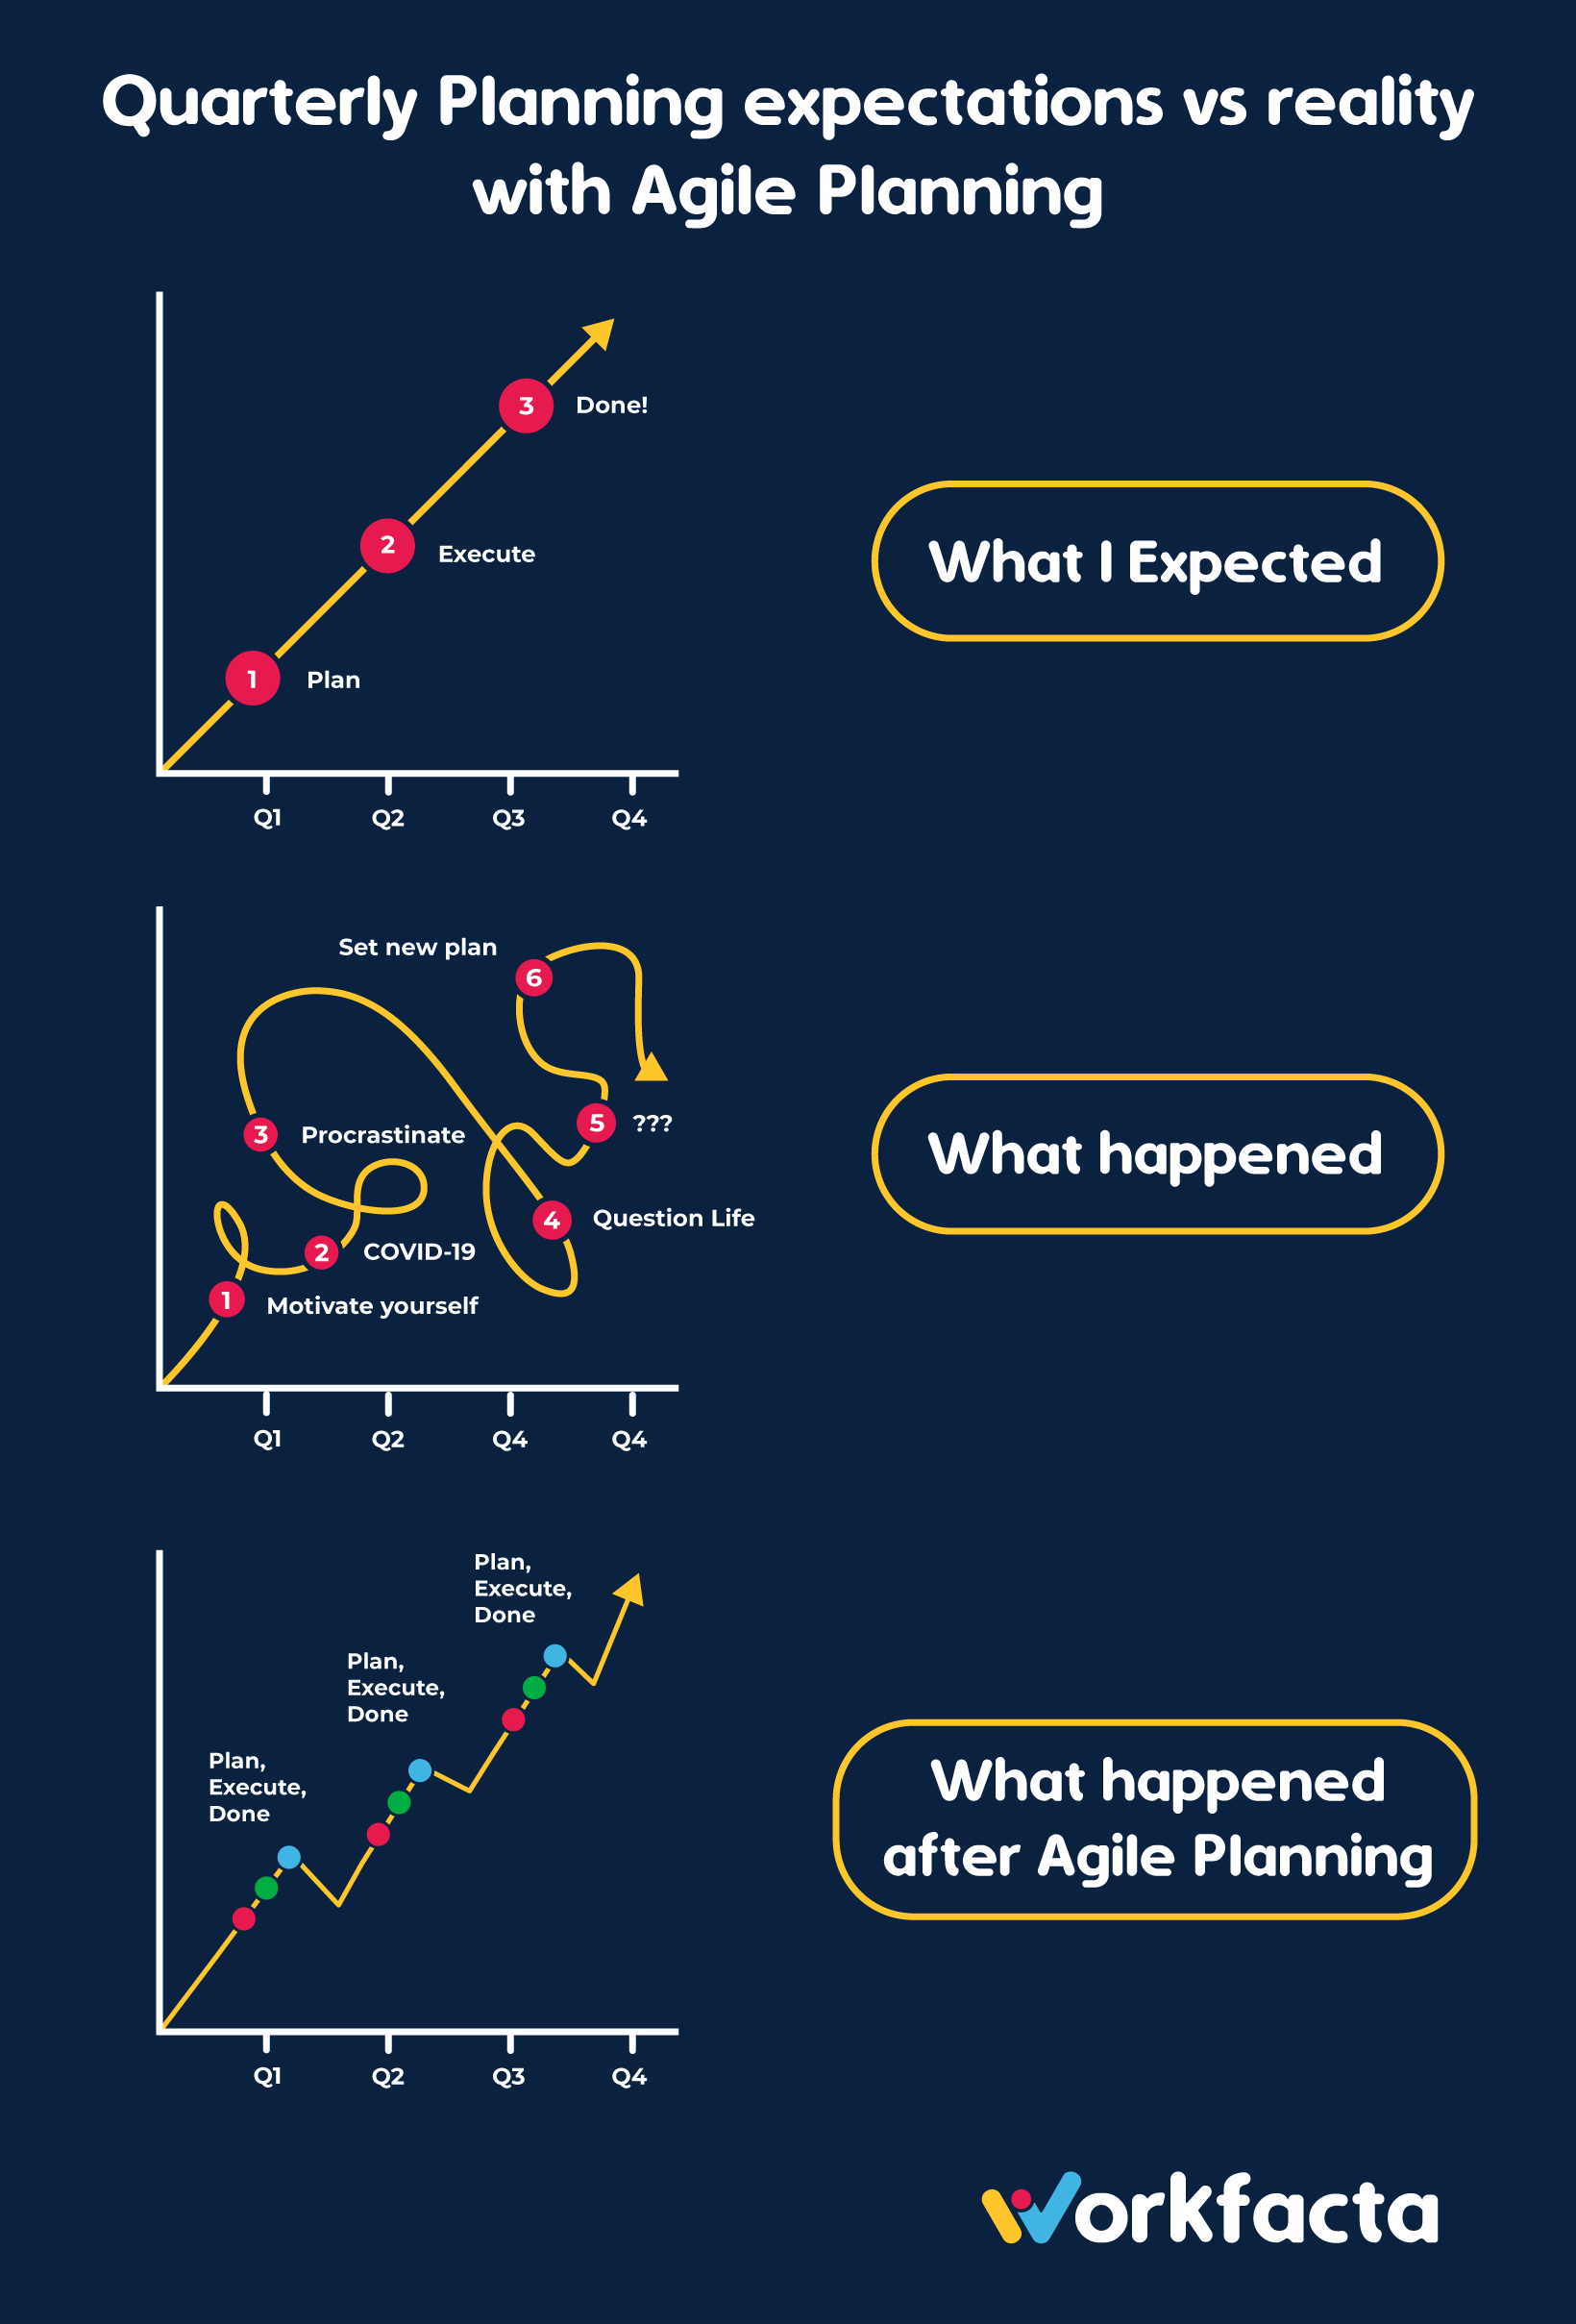 Workfacta Expectations vs Reality with Agile Planning